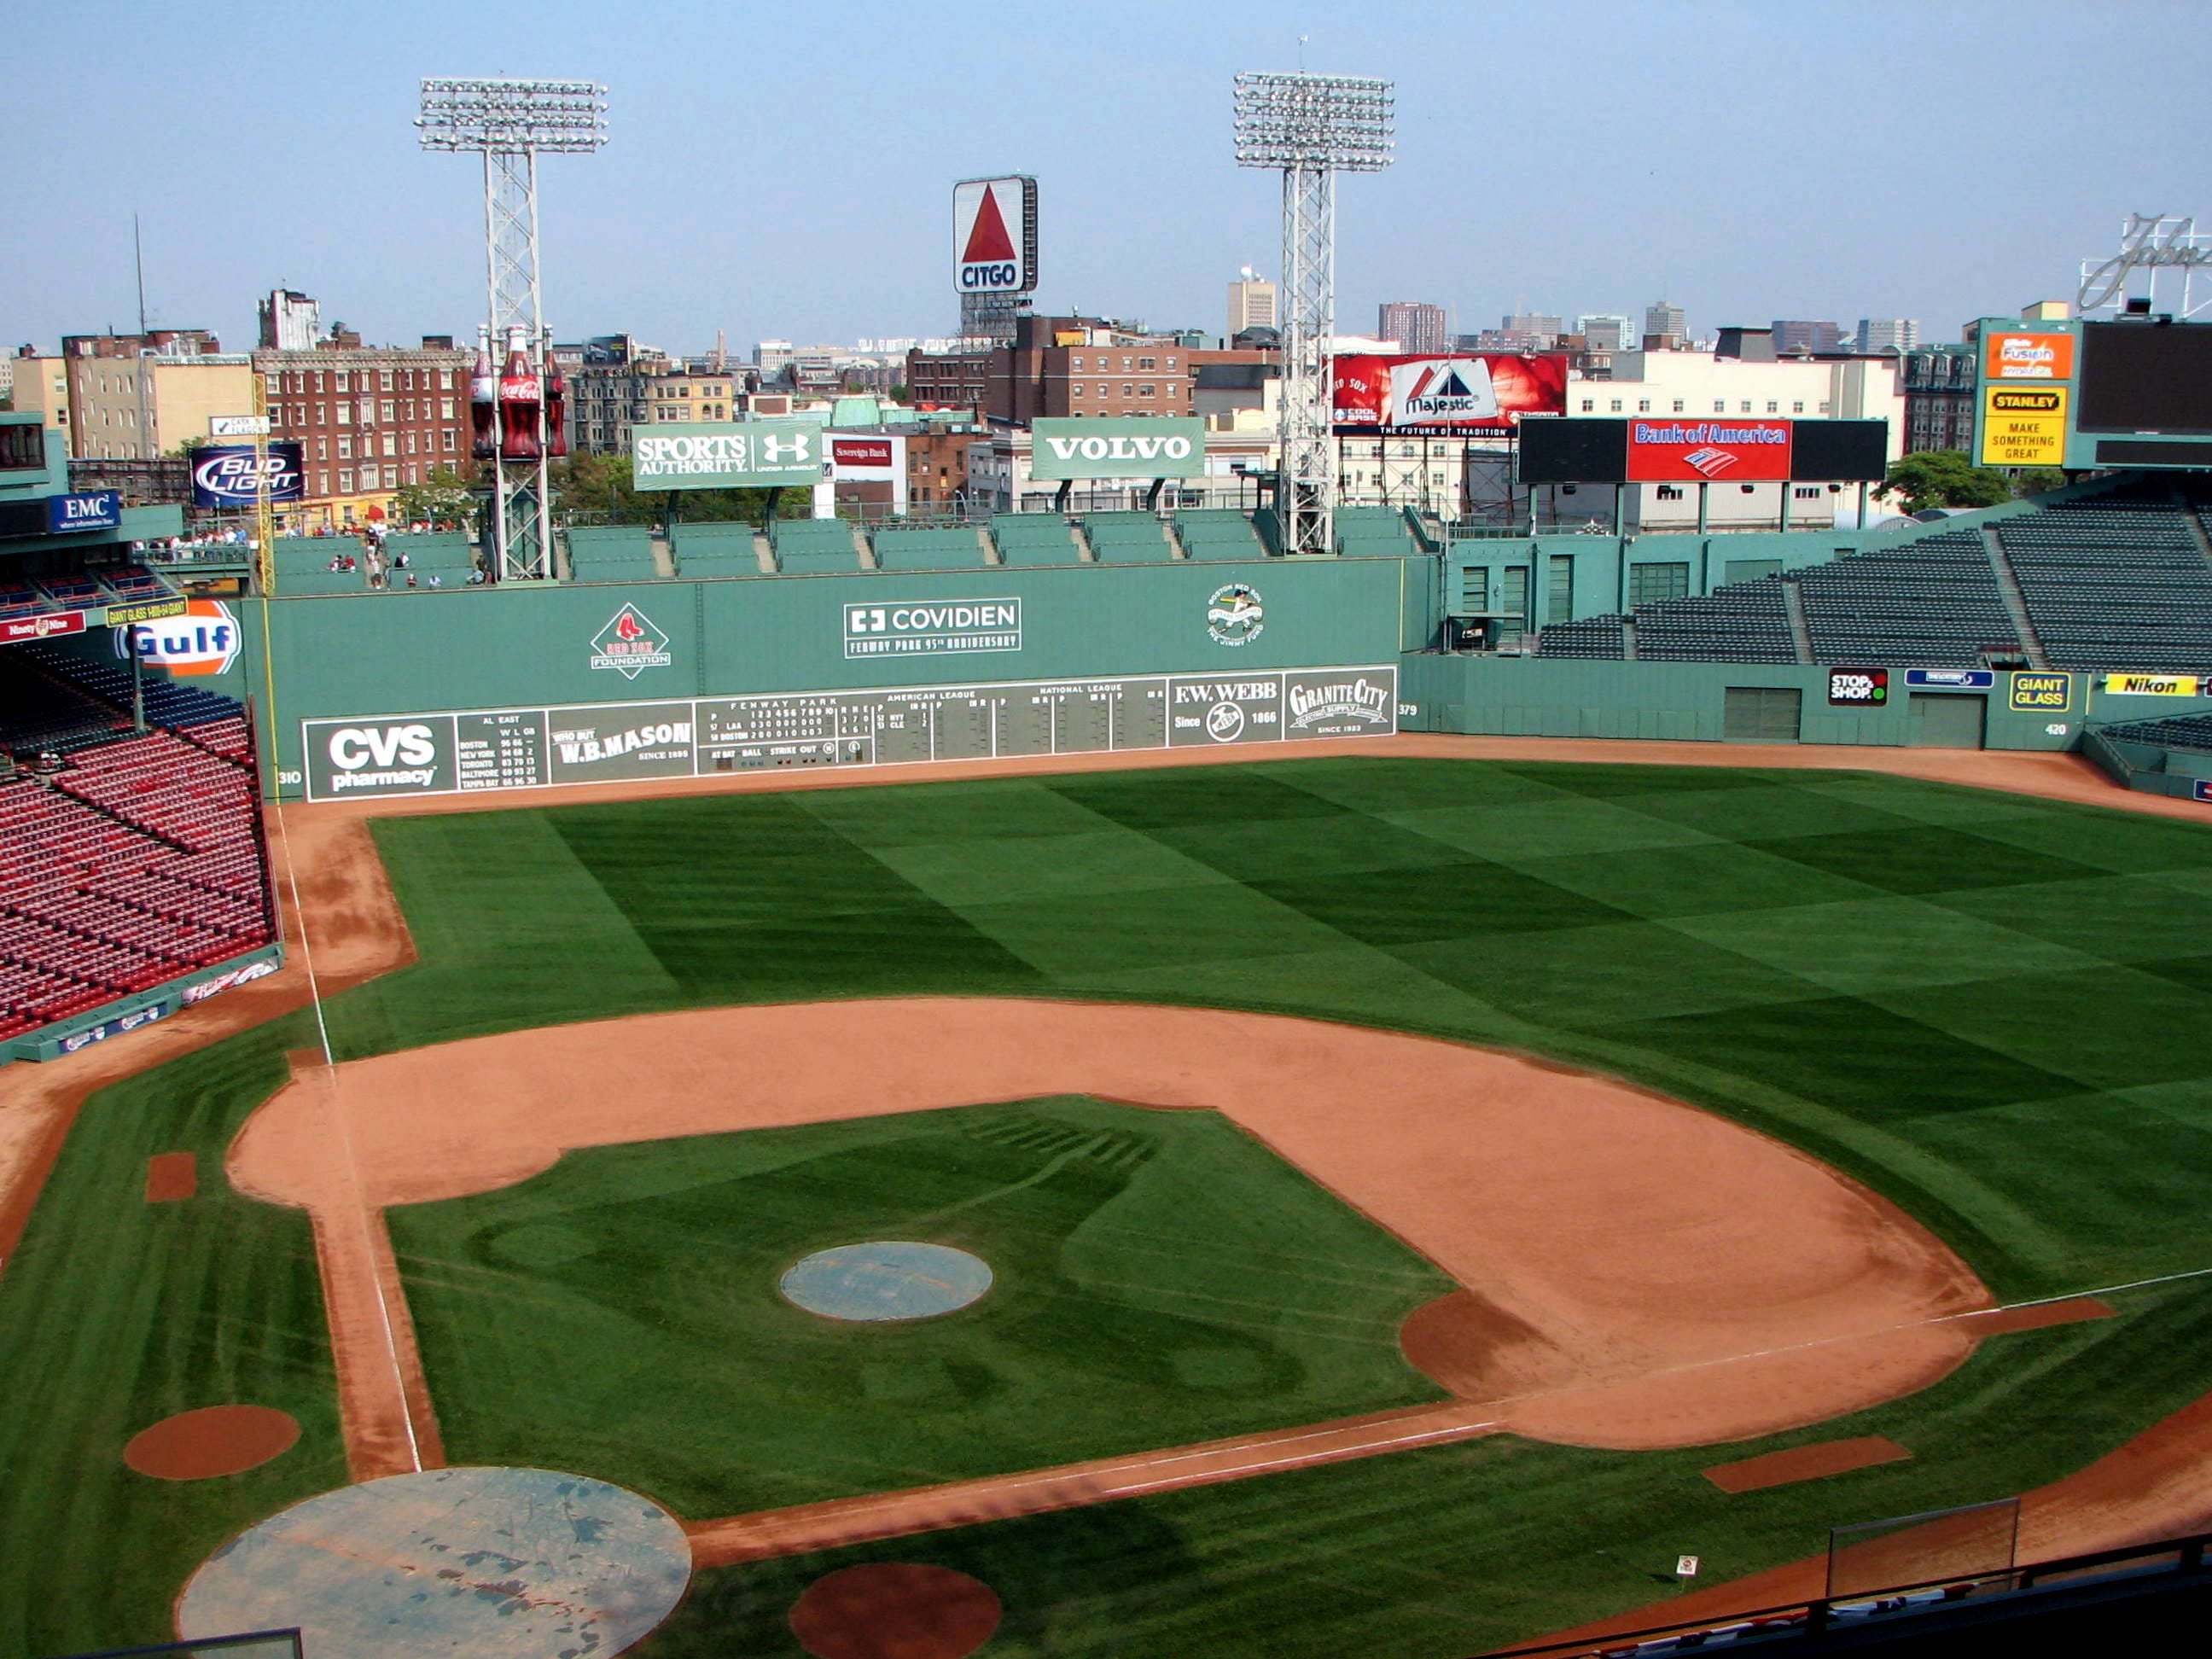 Red Sox upping security at Fenway after Las Vegas shooting